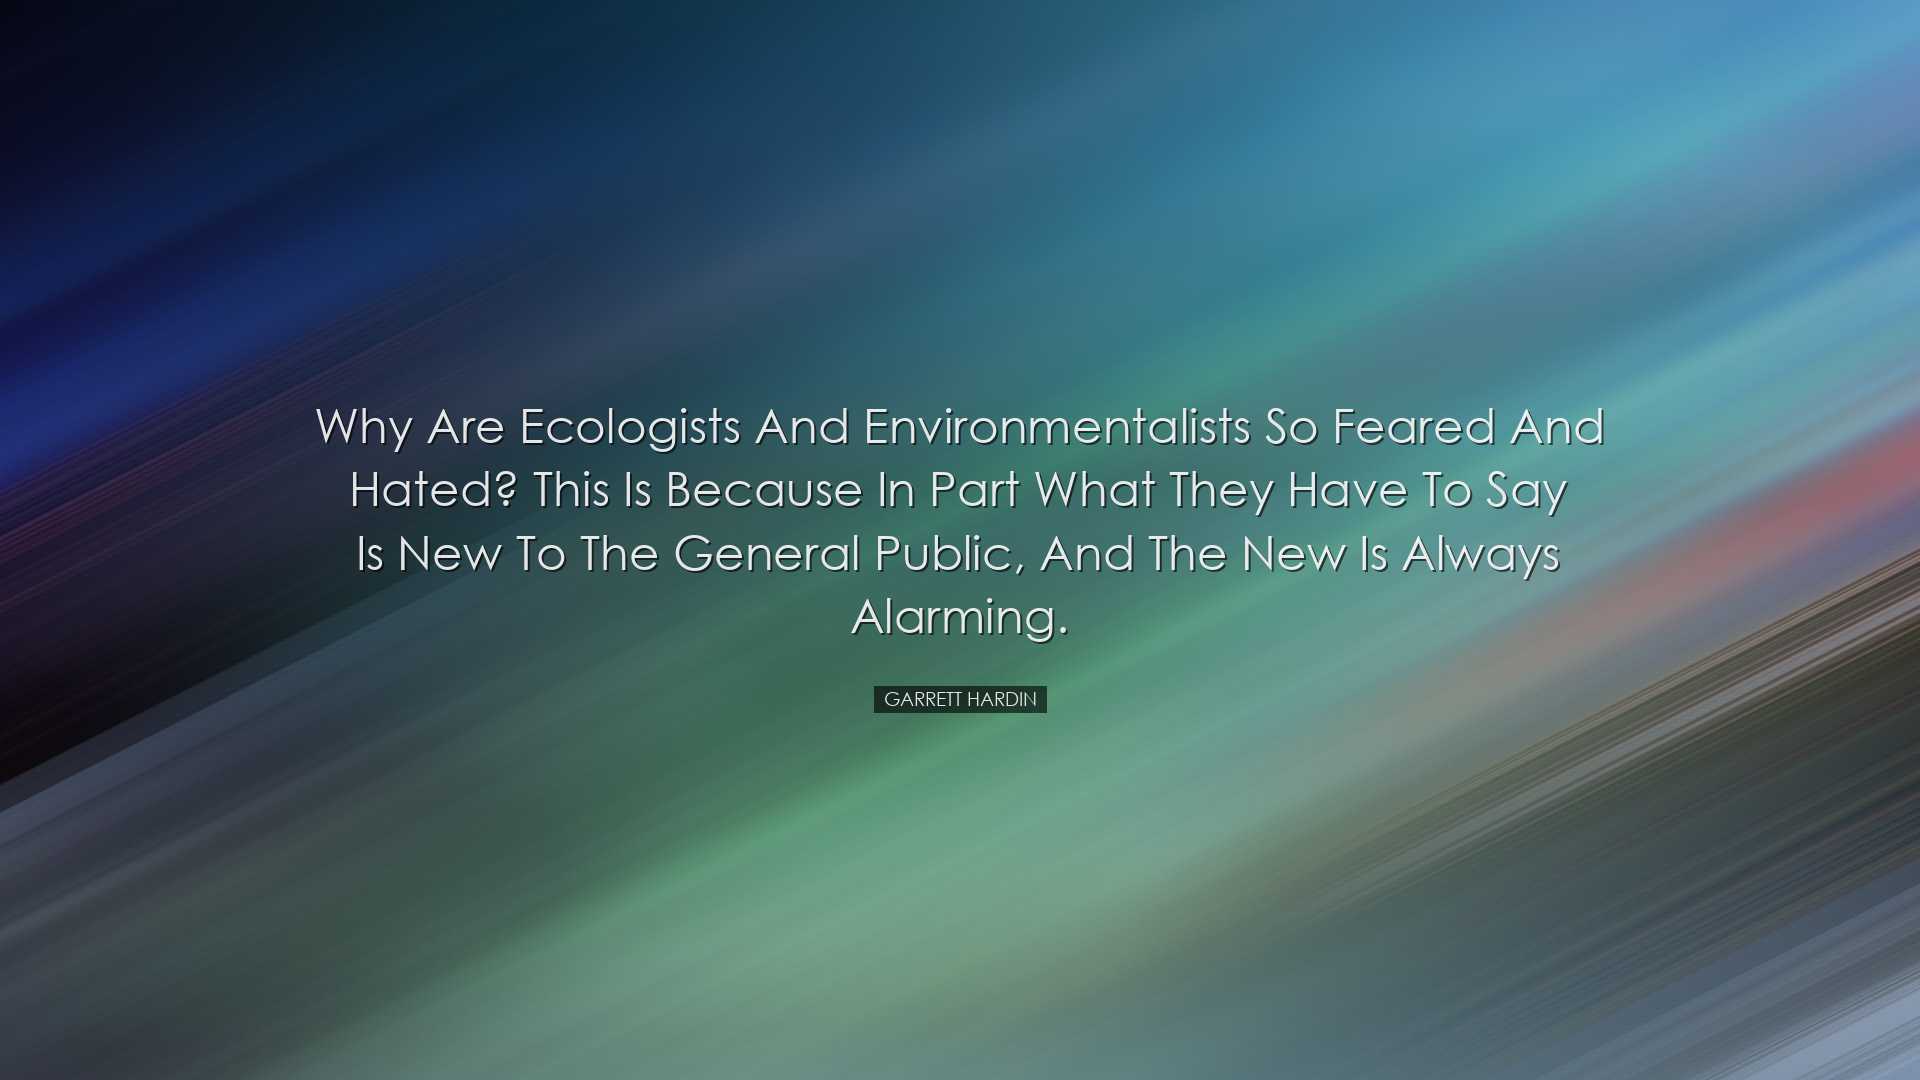 Why are ecologists and environmentalists so feared and hated? This